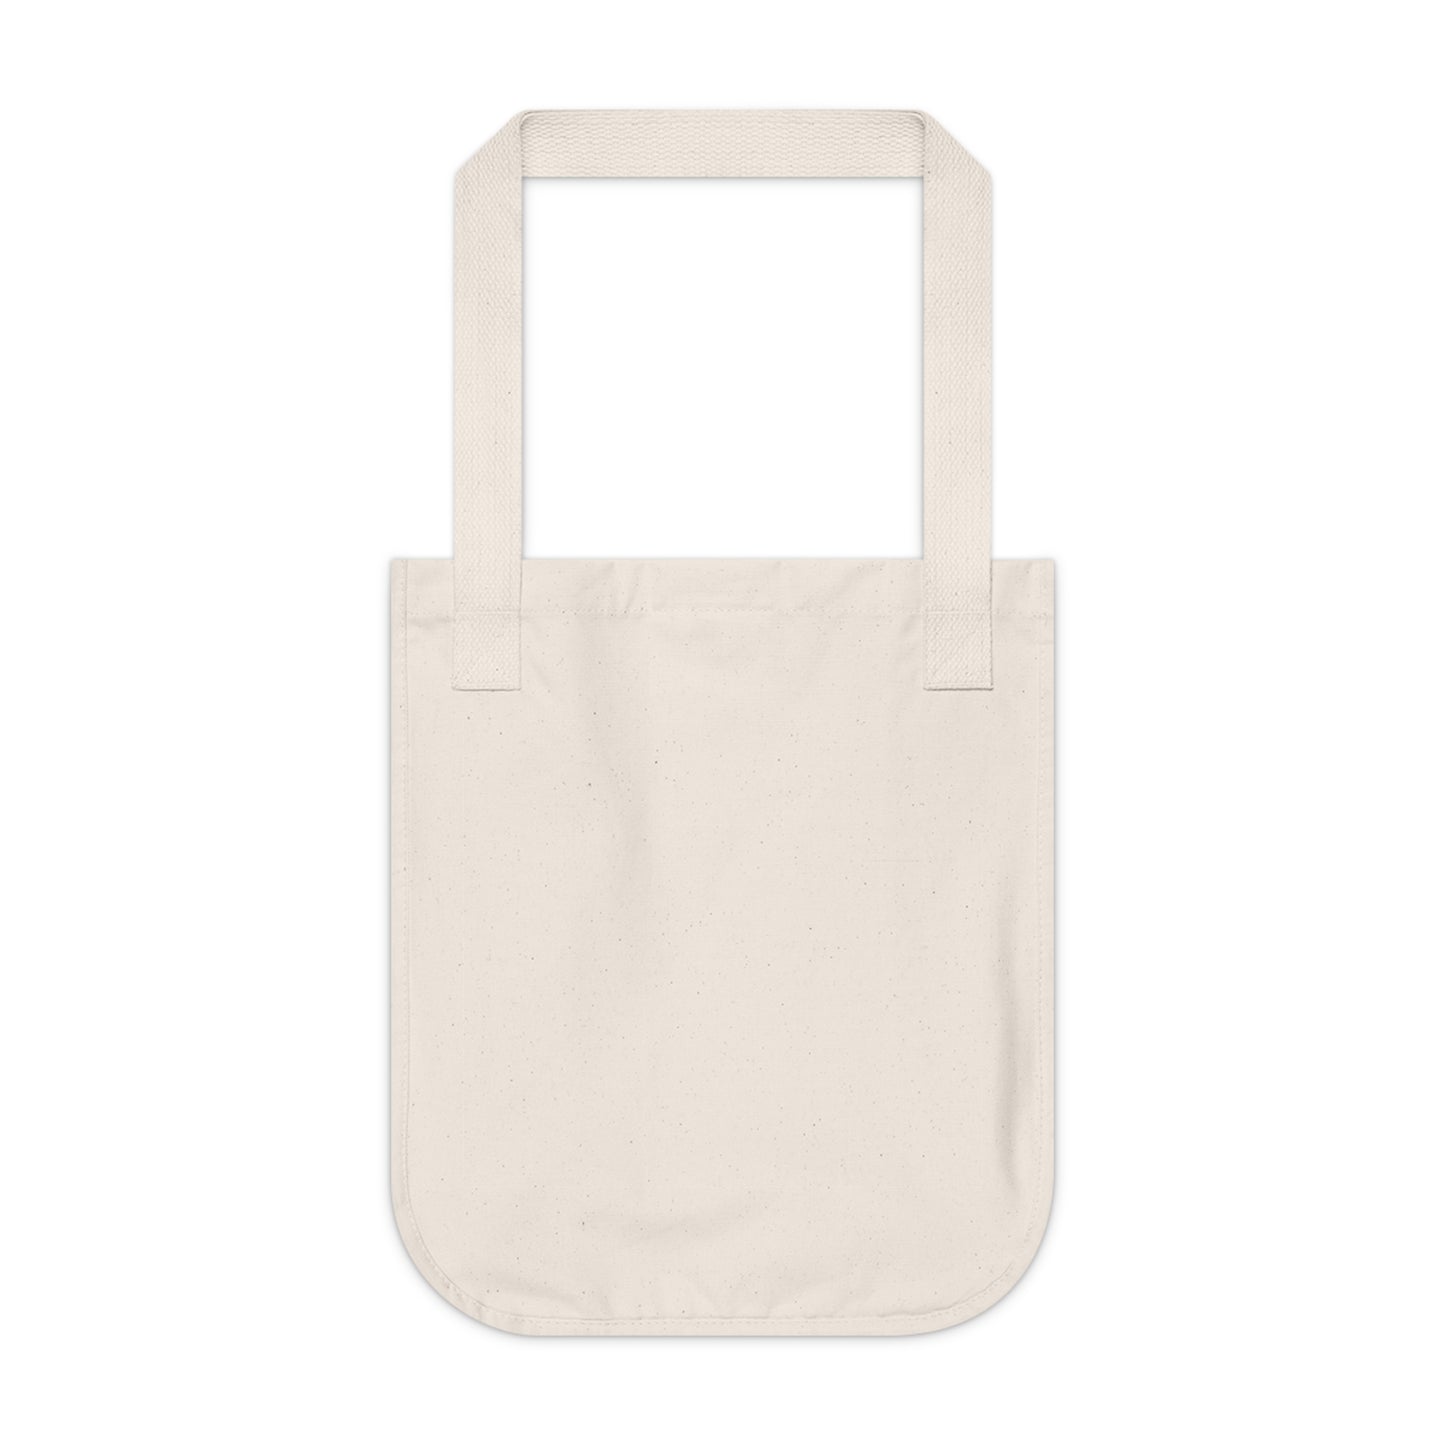 "Surprising Beauty: An Unexpected Artpiece" - Bam Boo! Lifestyle Eco-friendly Tote Bag